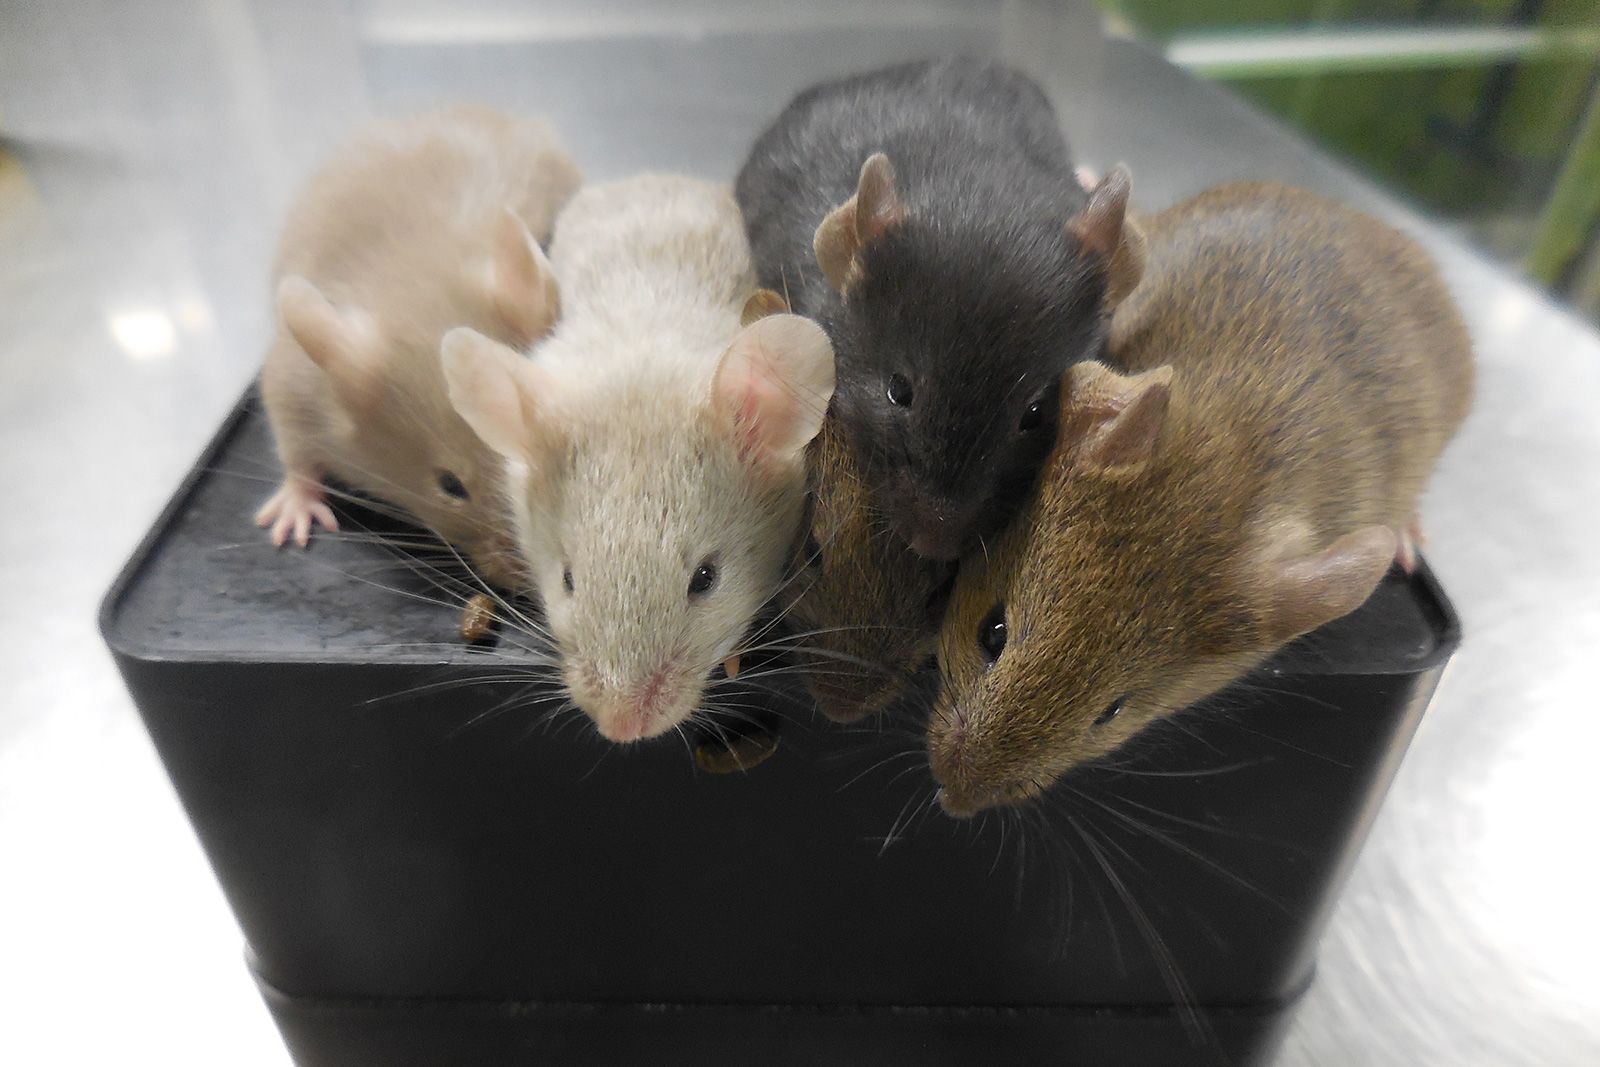 Arab Live X Hamster Scientists create mice from two dads | CNN